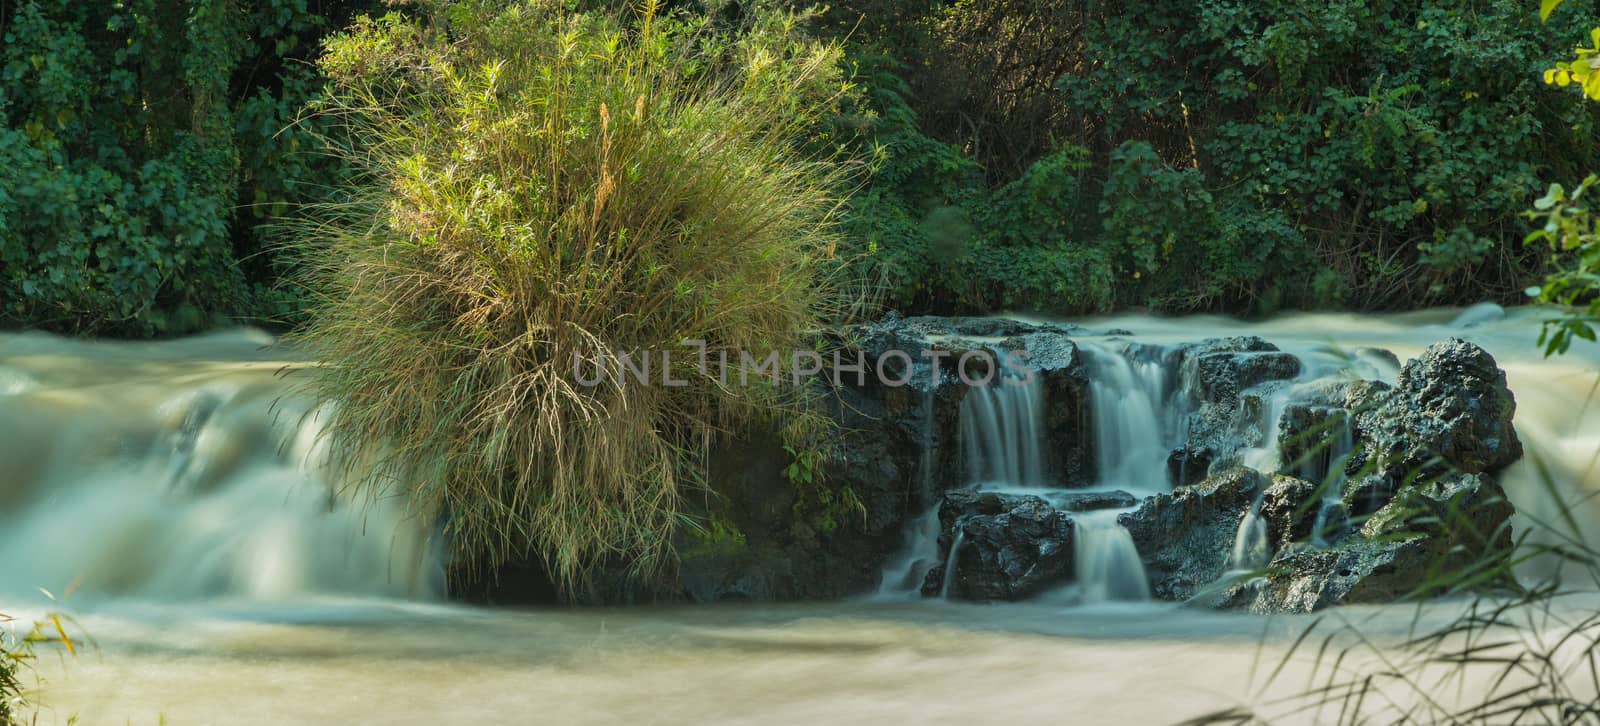 The Awash River flowing through the dense vegetation in the Rift Valley area of Ethiopia